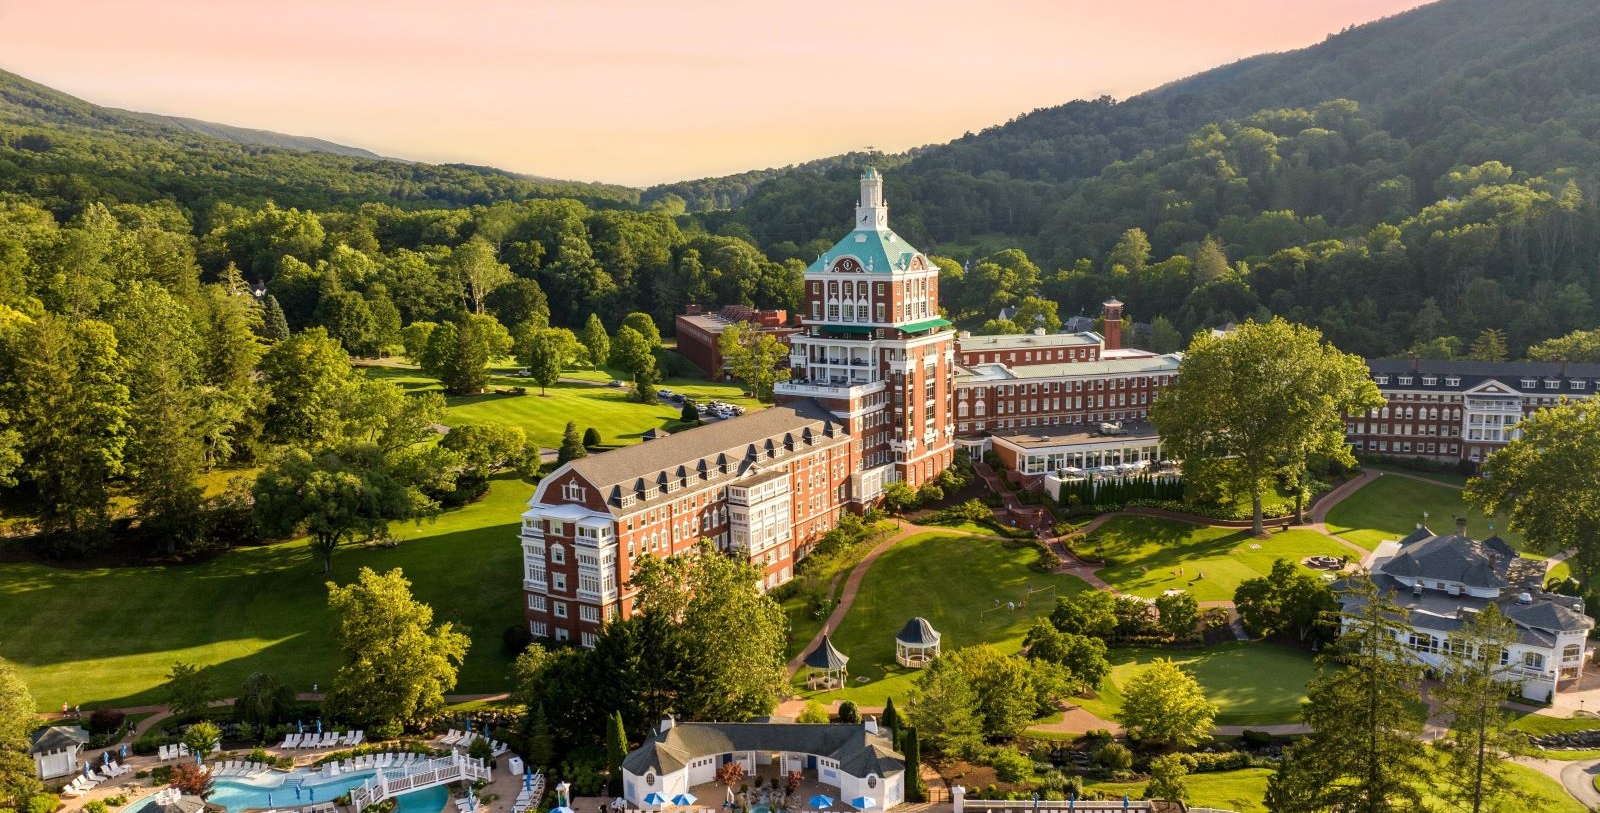 Image of Hotel Exterior Omni Homestead Resort, 1766, Member of Historic Hotels of America, in Hot Springs, Virginia, Special Offers, Discounted Rates, Families, Romantic Escape, Honeymoons, Anniversaries, Reunions